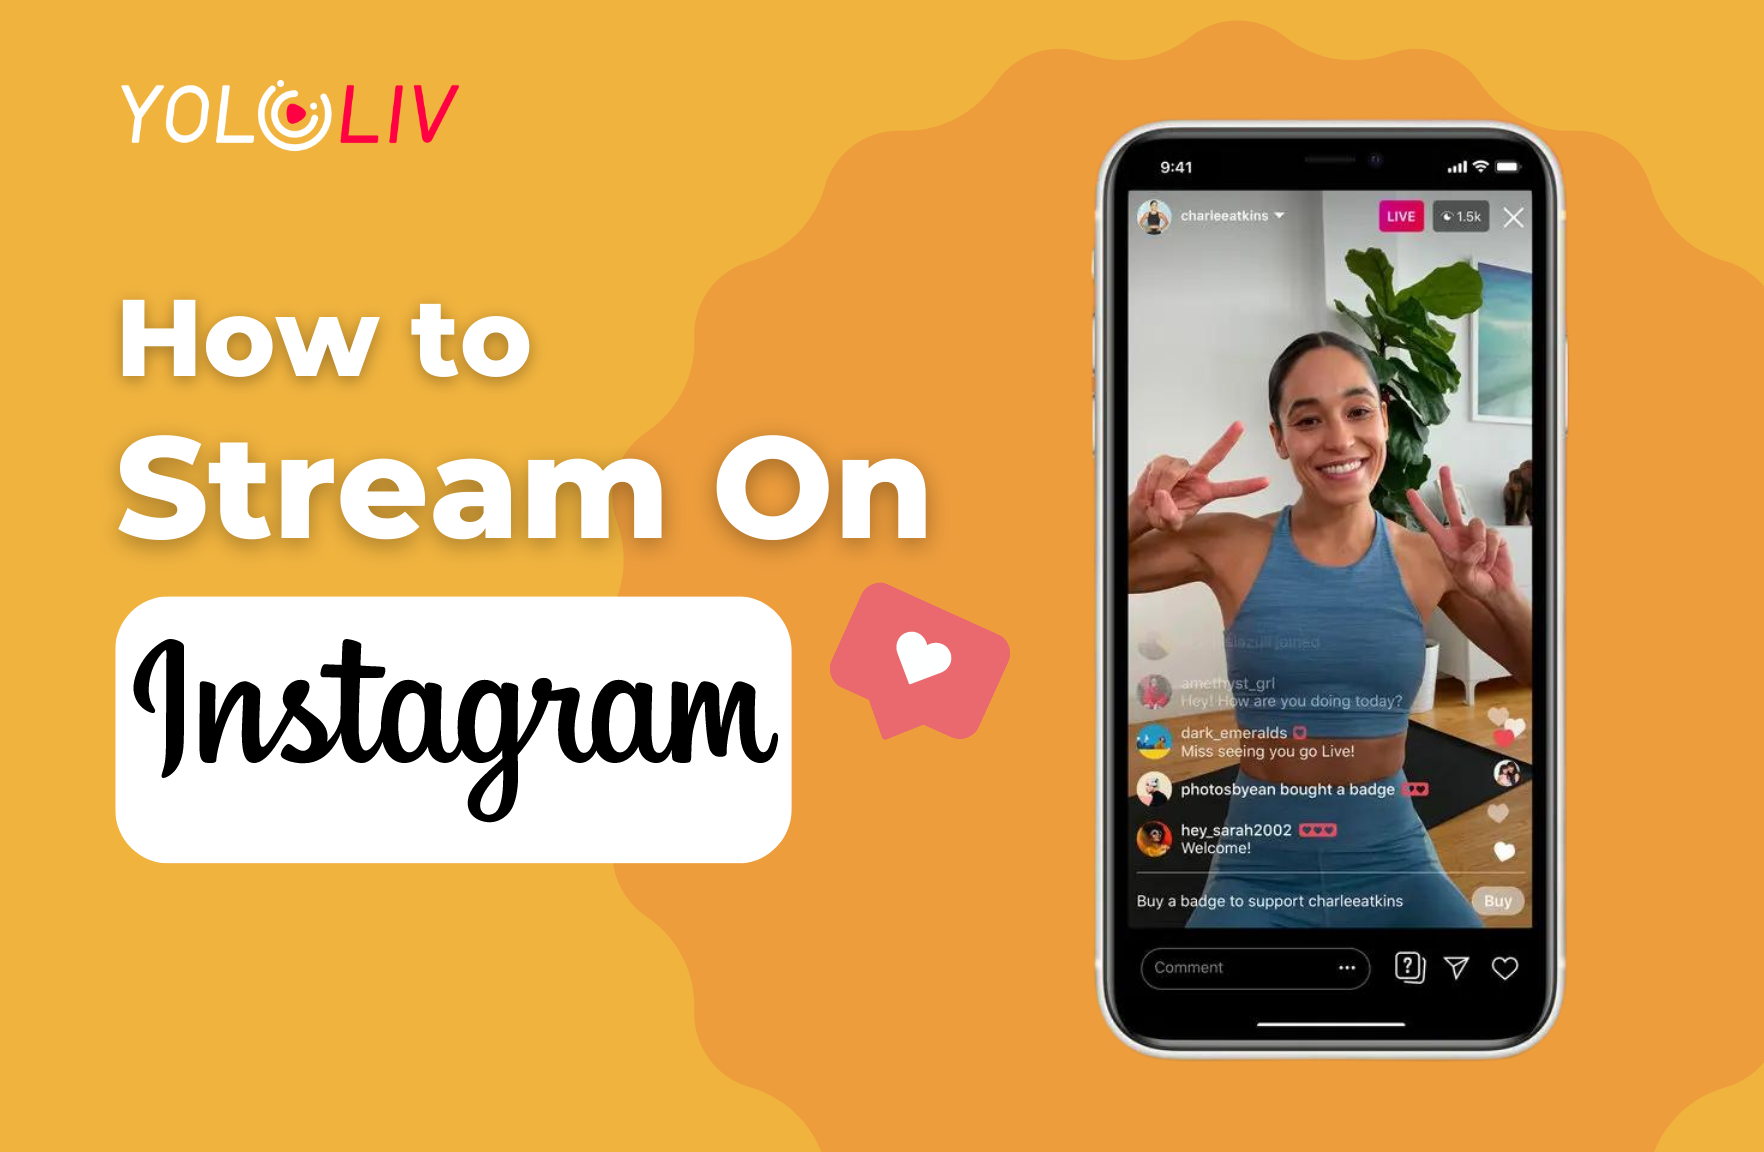 How to Live Stream on